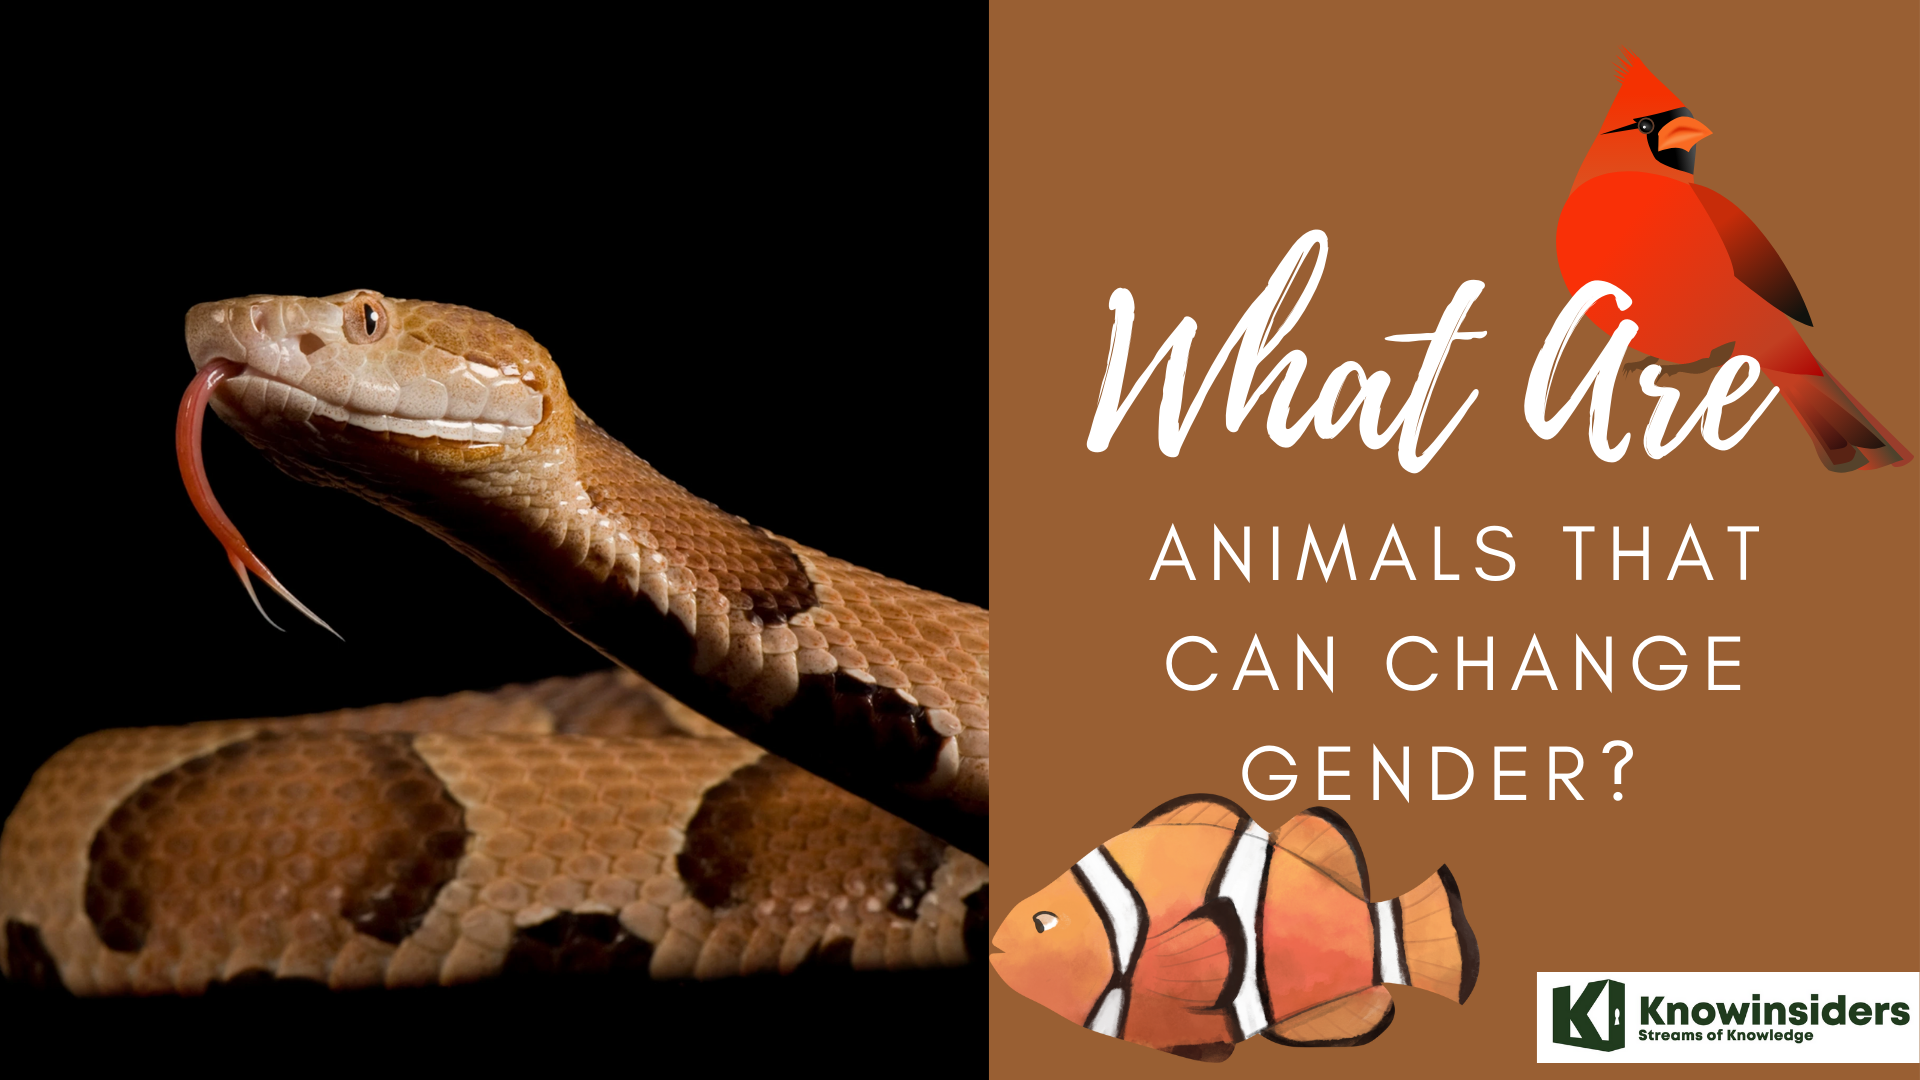 Amazing Facts About The Animals That Can Change Gender